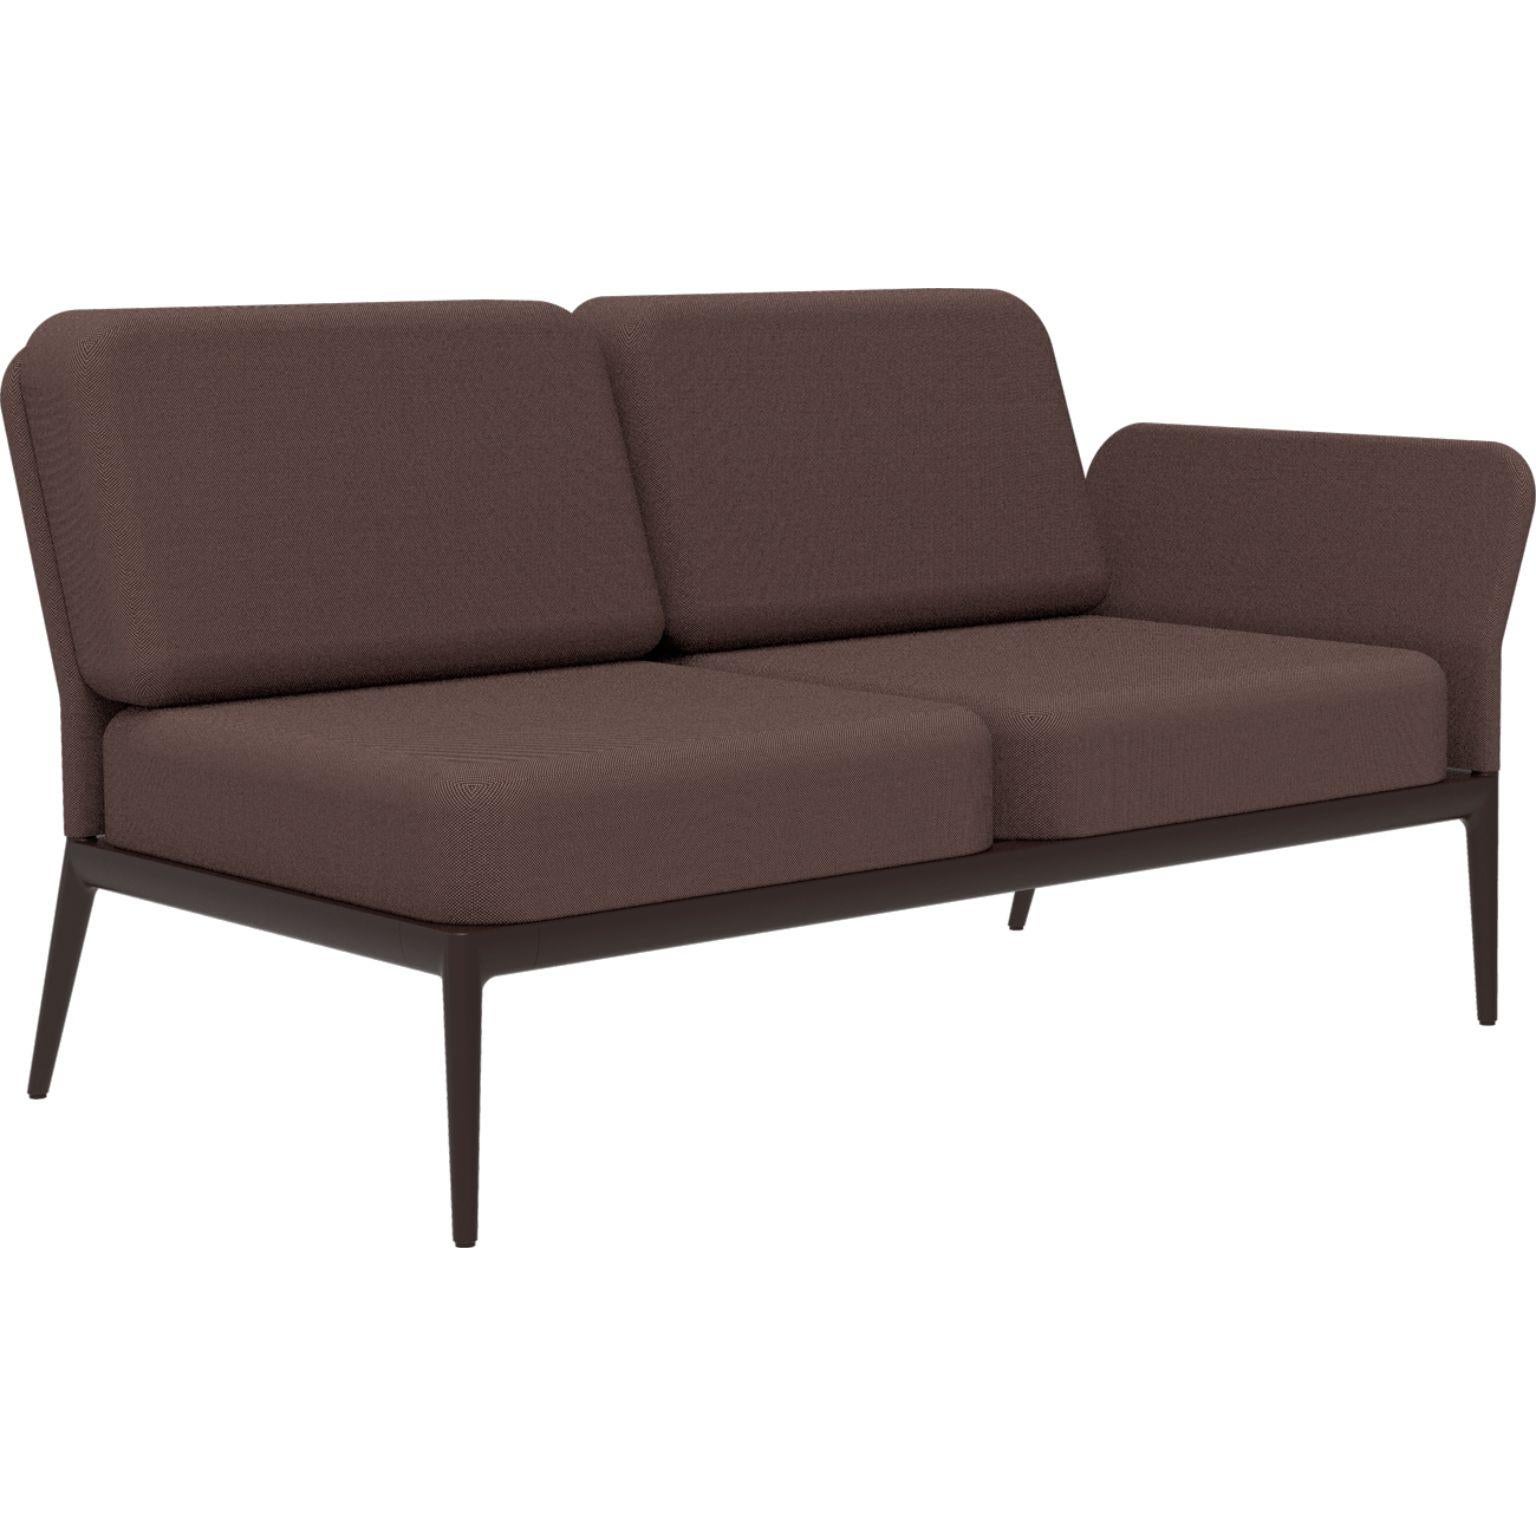 Cover Chocolate Double Left Modular Sofa by MOWEE
Dimensions: D83 x W148 x H81 cm (seat height 42 cm)
Material: Aluminum and upholstery.
Weight: 29 kg.
Also available in different colors and finishes. Please contact us.

An unmistakable